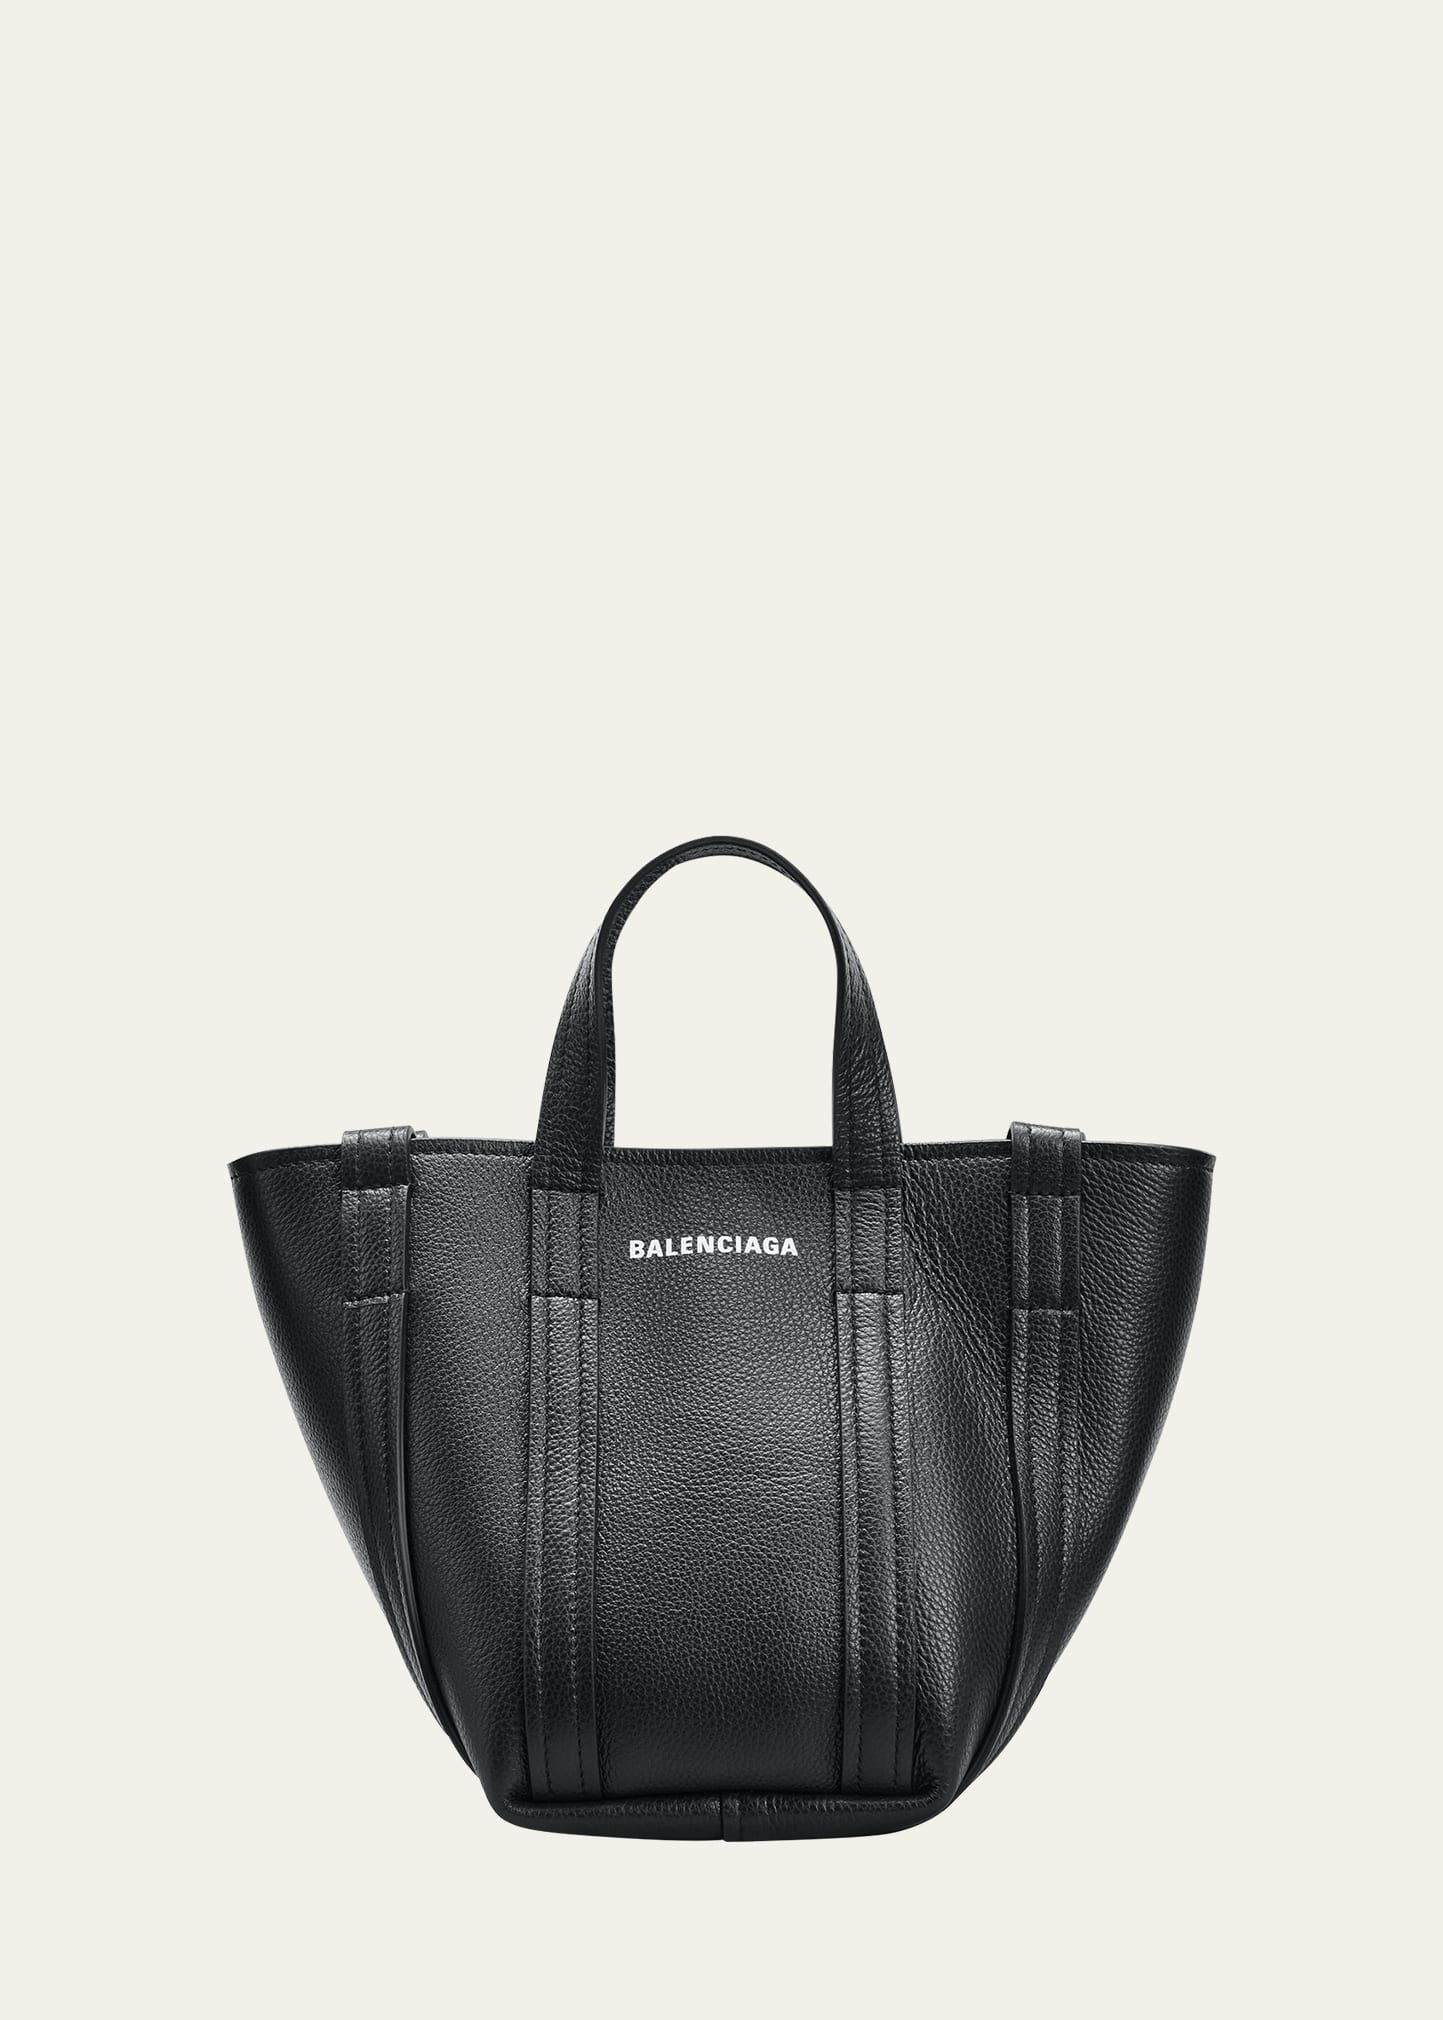 Balenciaga Xs Everyday Grained Leather Tote Crossbody Bag In Black/white